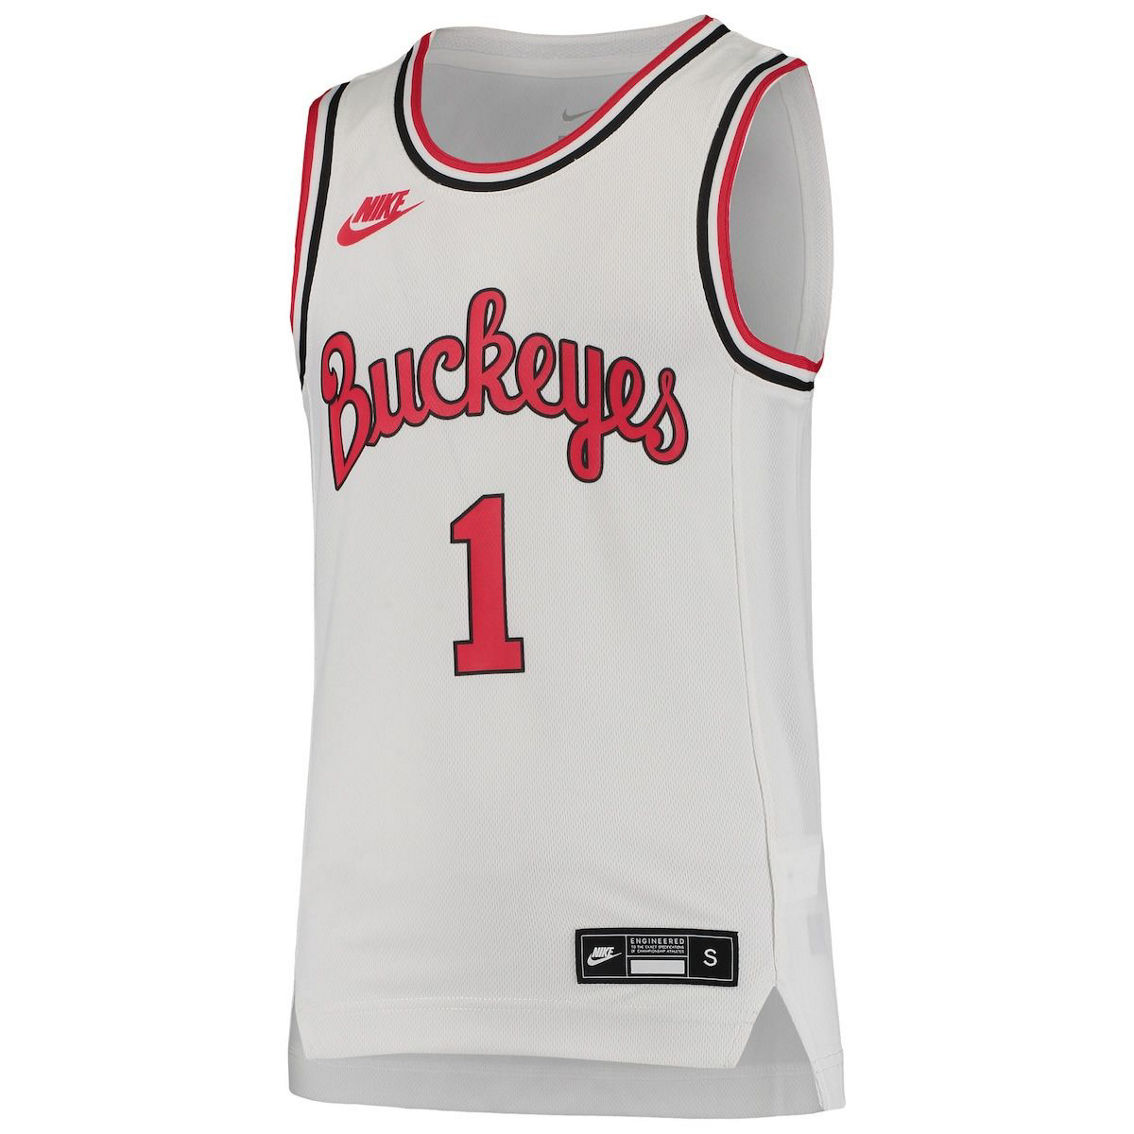 Nike Youth #1 White Ohio State Buckeyes Throwback Team Replica Basketball Jersey - Image 3 of 4